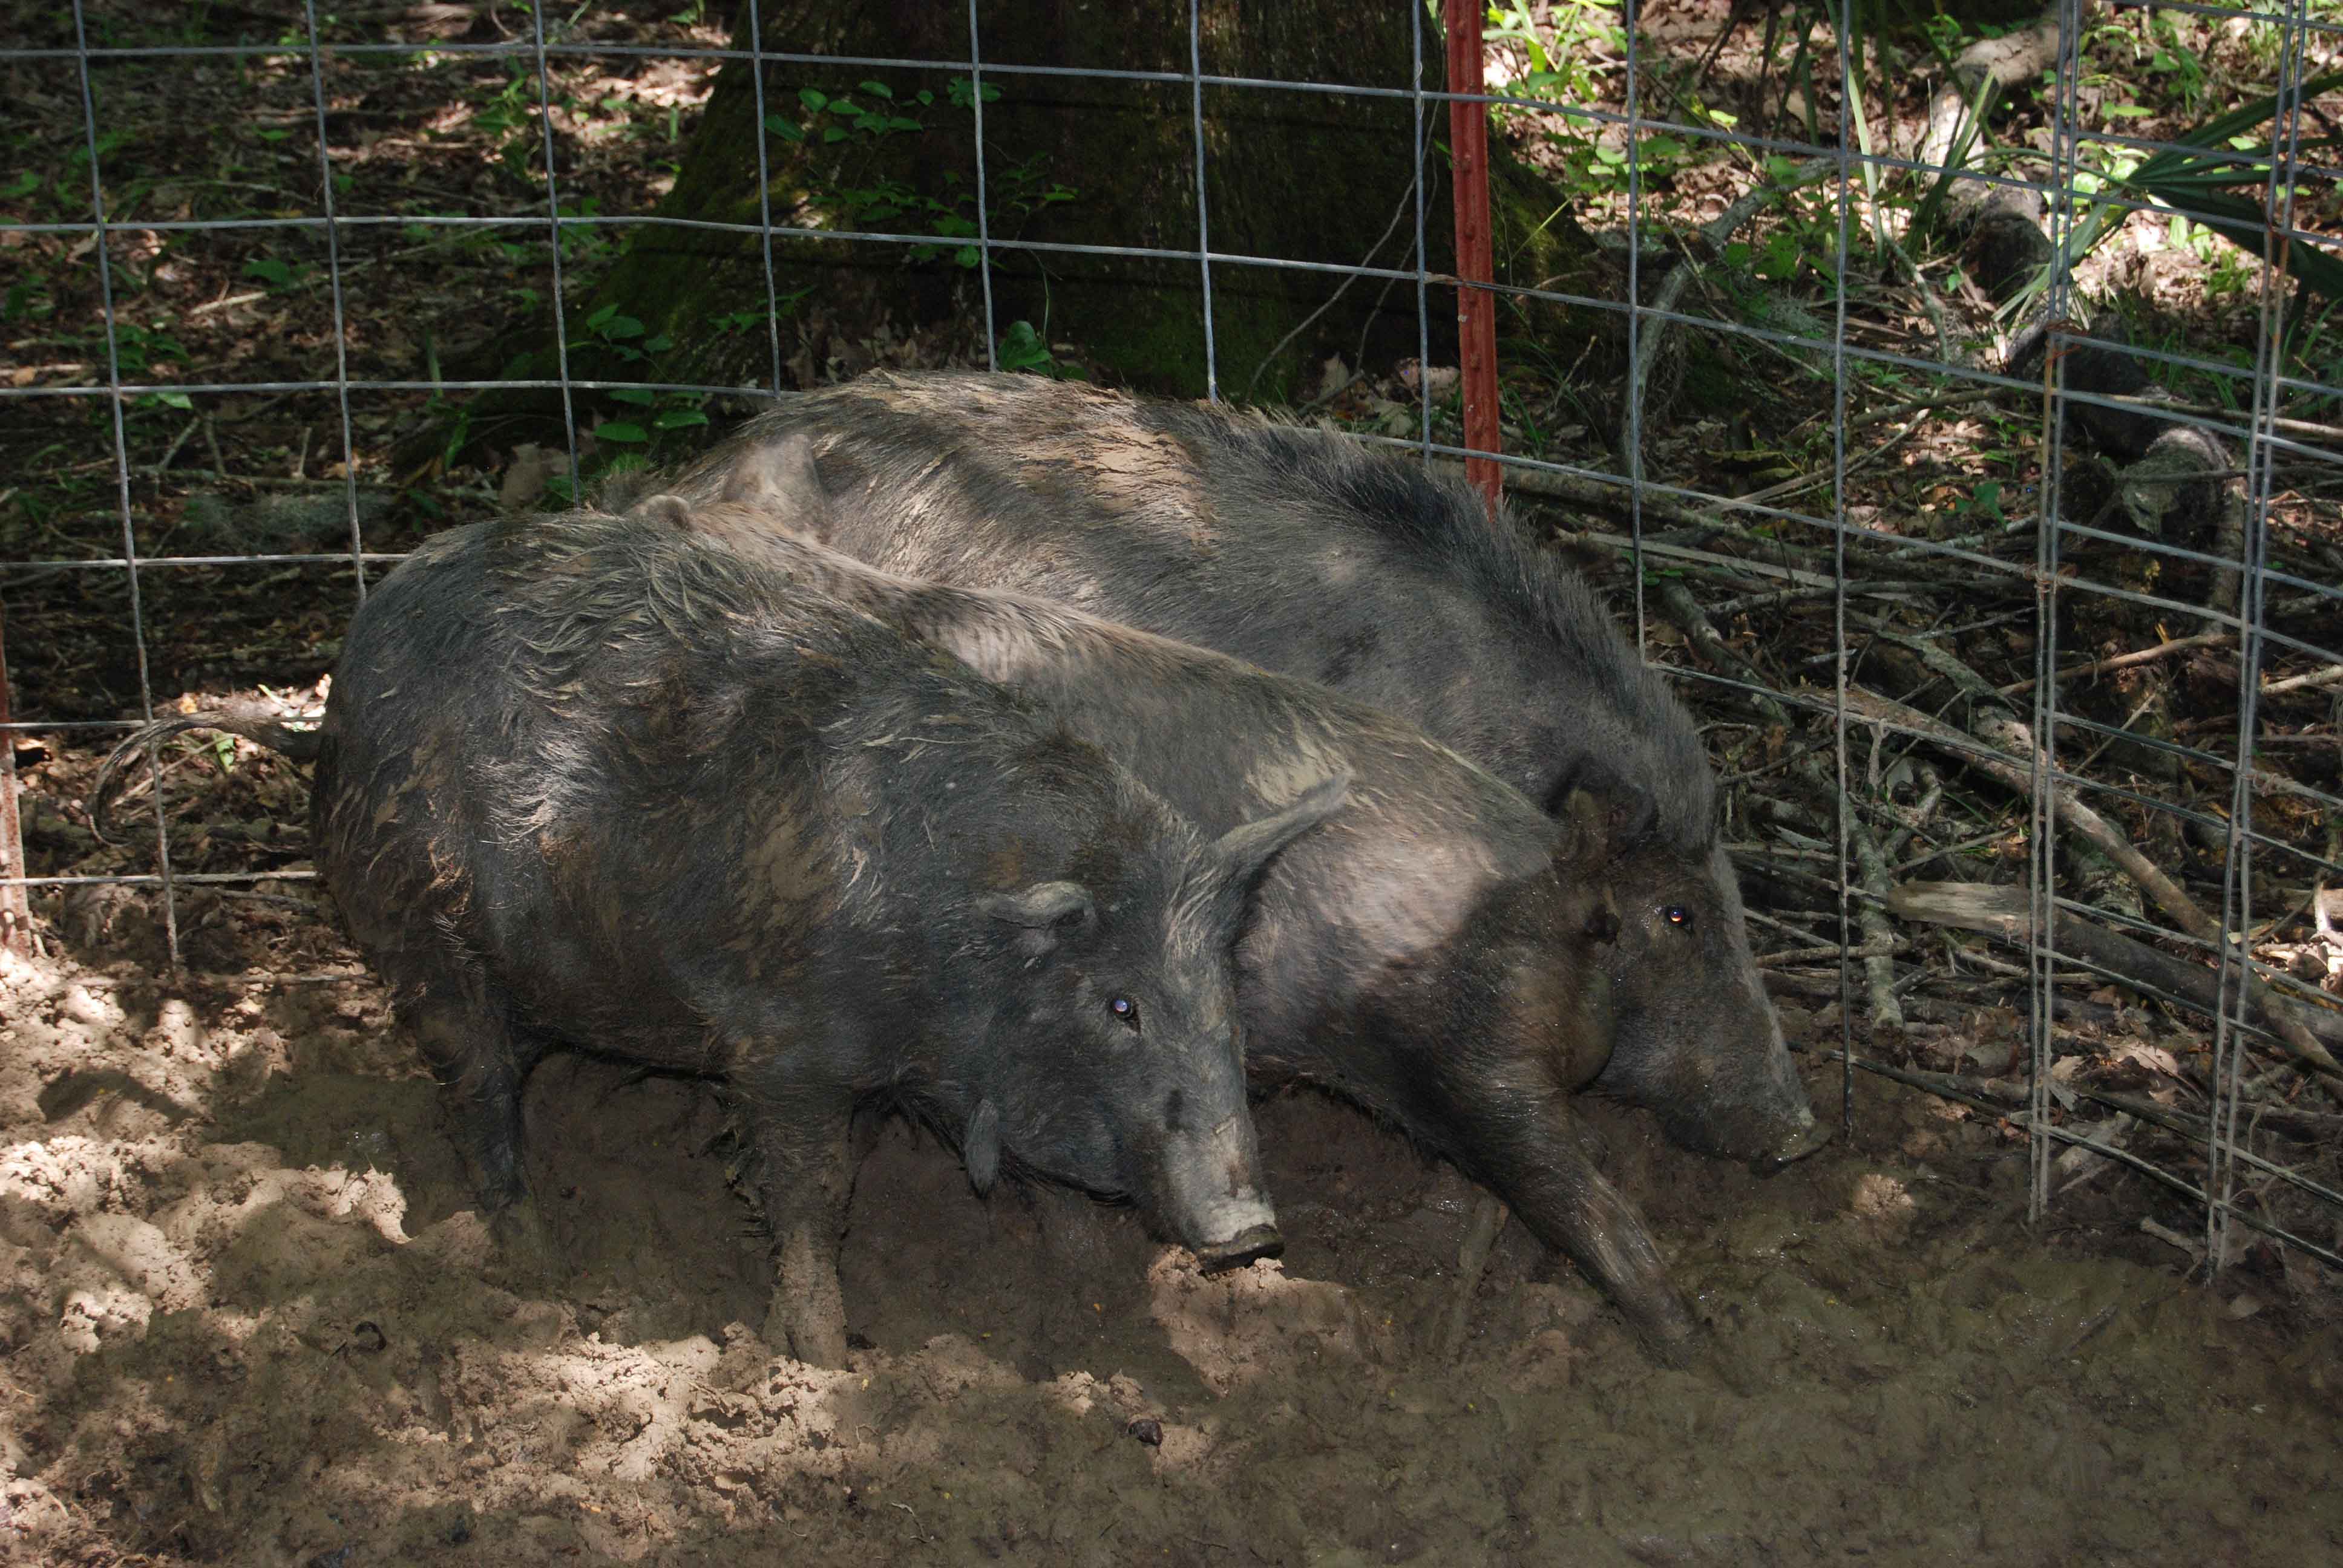 University of Georgia researchers are surveying landowners in Georgia to quantify the economic damage feral swine are causing the state.